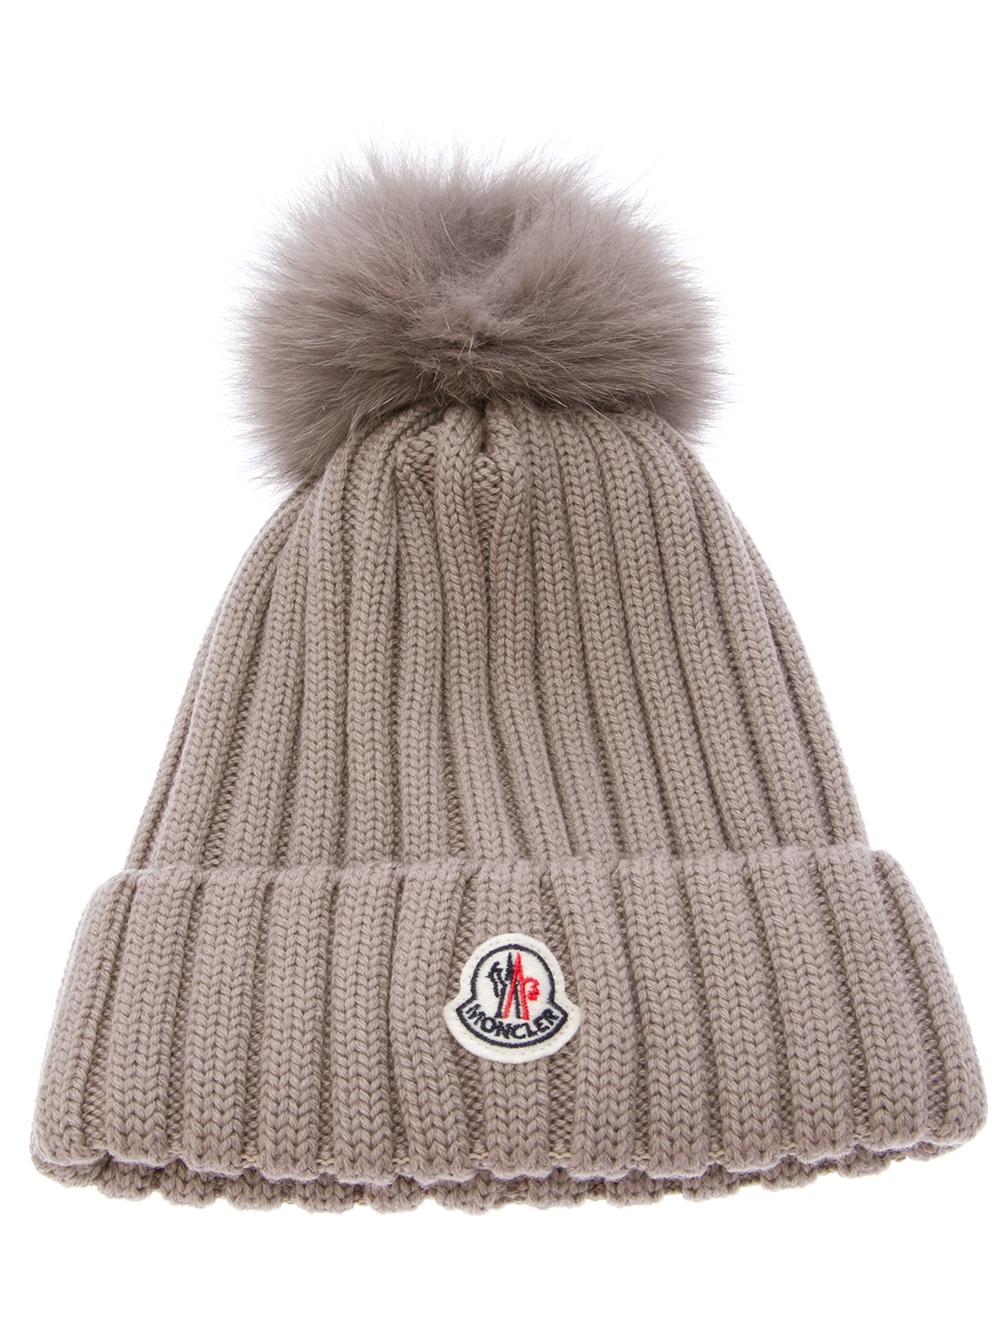 Lyst - Moncler Wool Ribbed Knit Beanie Hat in Natural for Men